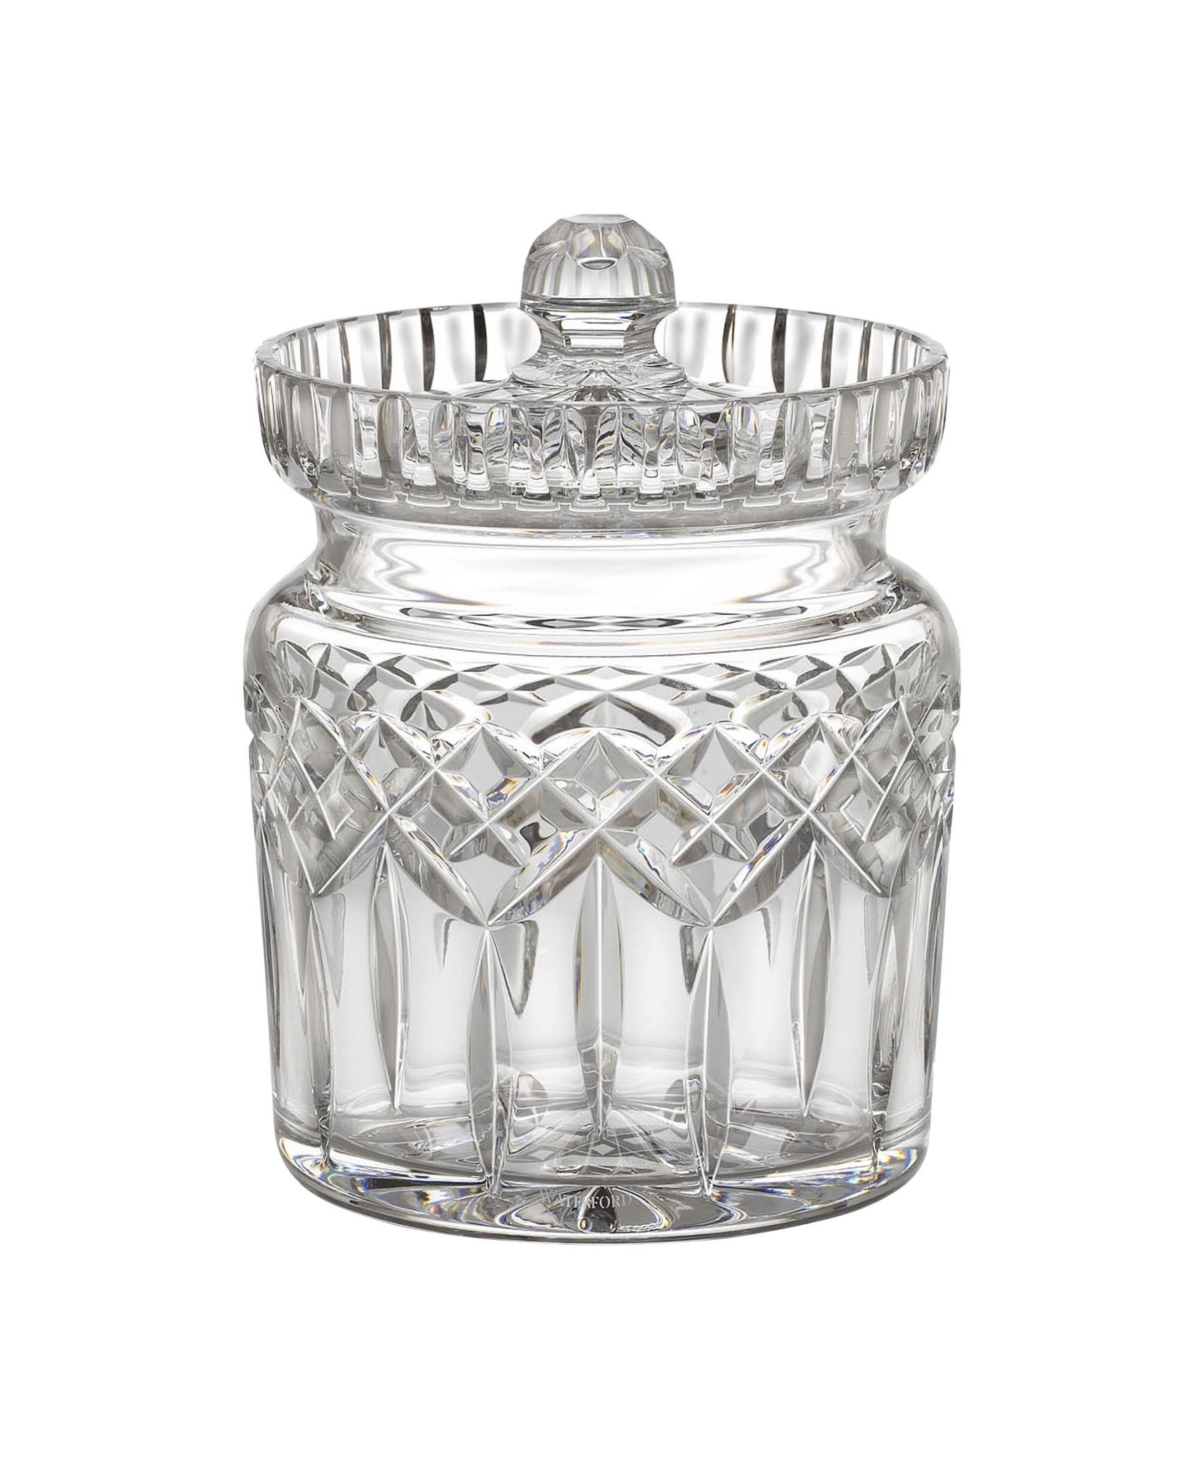 Waterford Lismore Biscuit Barrel In Clear